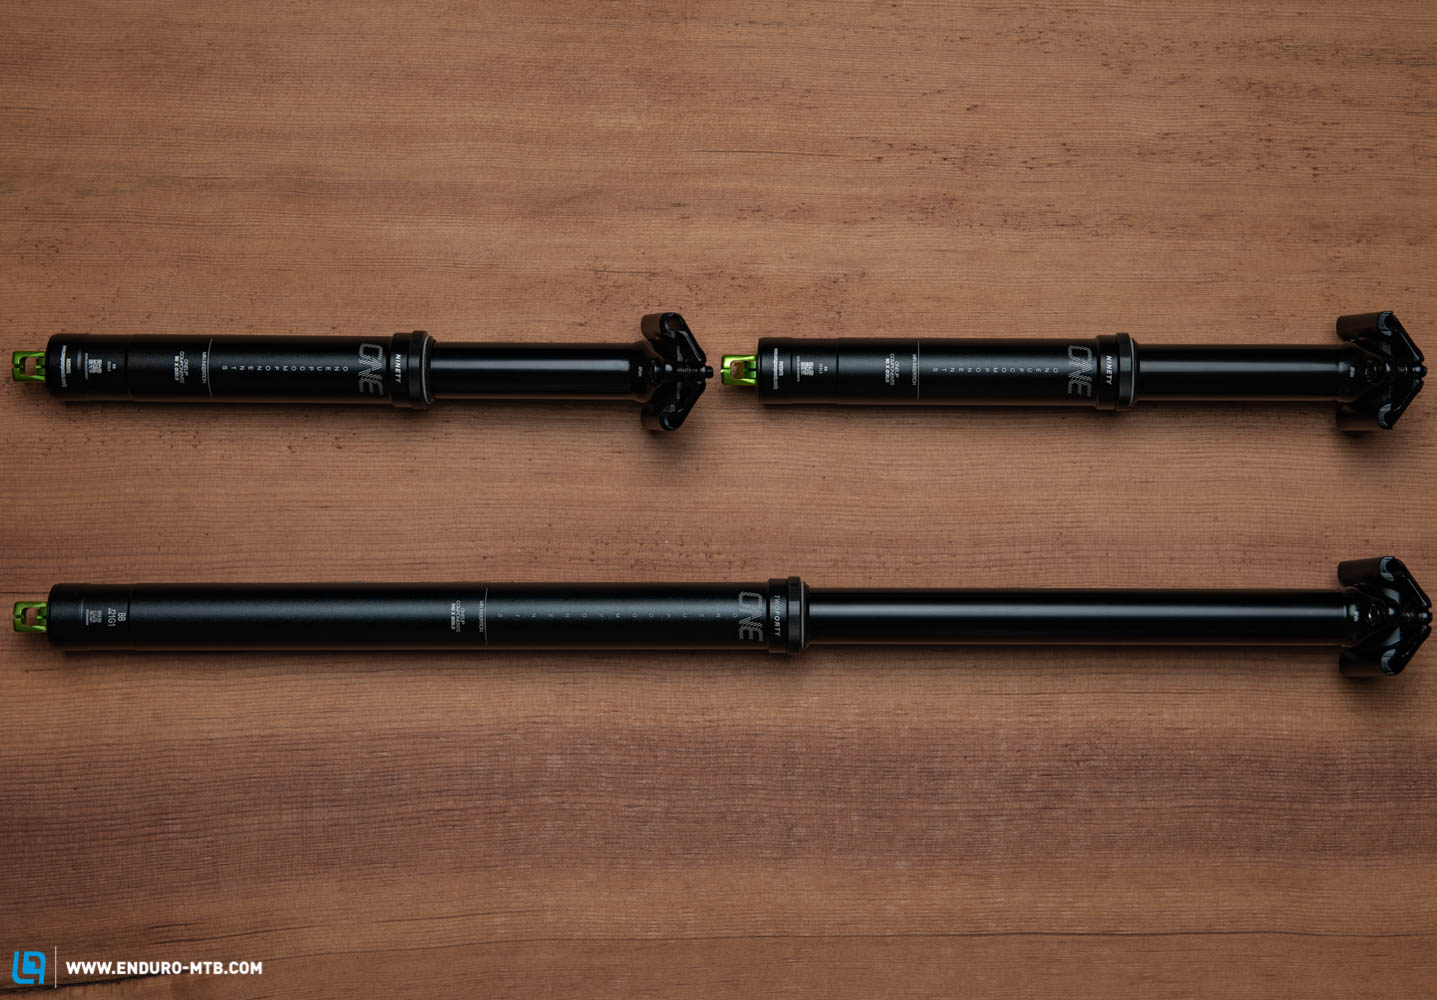 New OneUp Components V2 240 mm dropper post – Does length really matter?